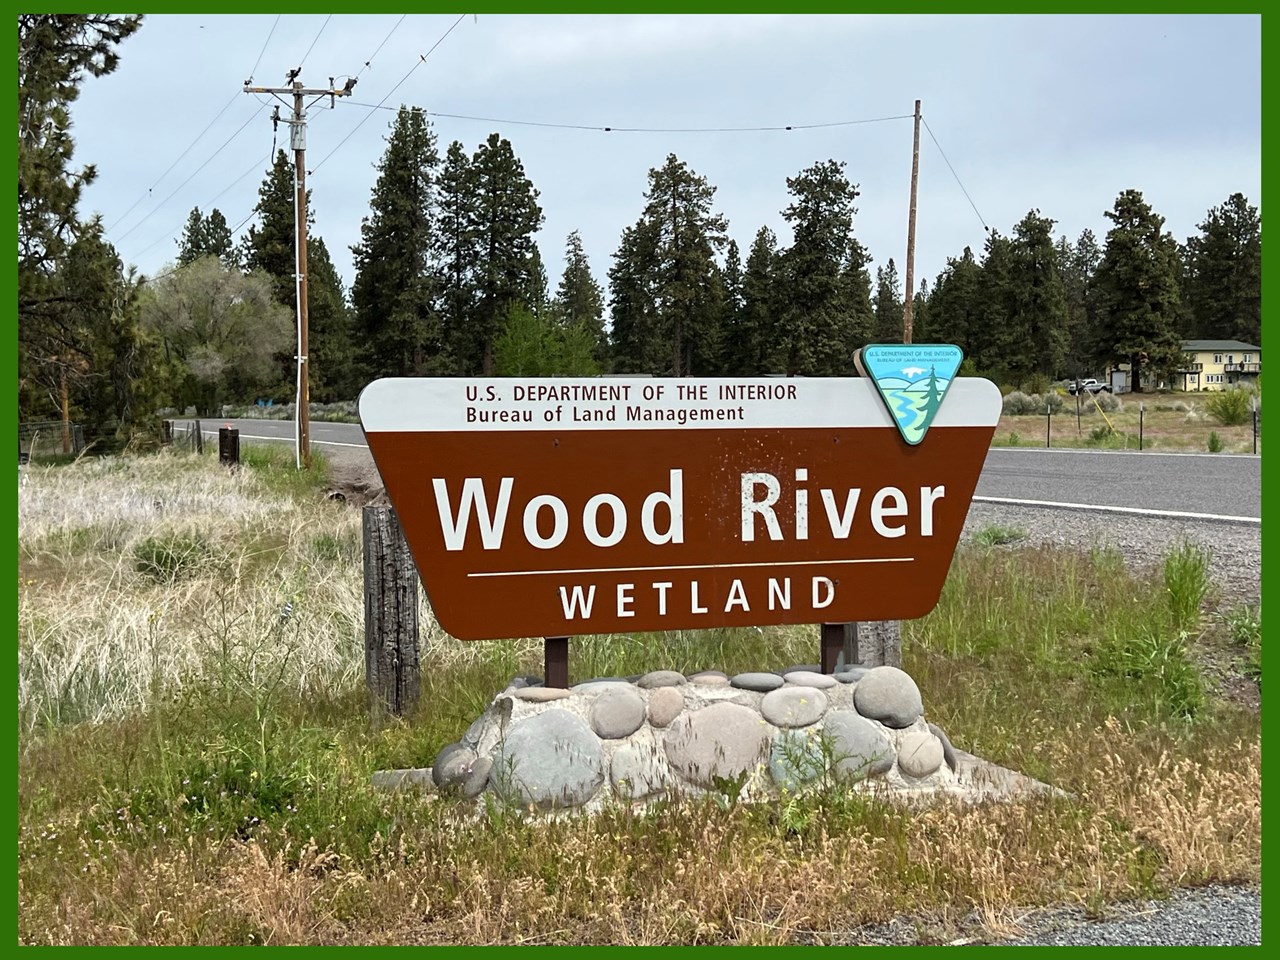 the wood river wetland is at the north end of agency lake. the area is in the pacific flyway of migratory birds. there are over 400 species of birds that come through the area, including bald eagles, sandhill cranes, and pelicans!